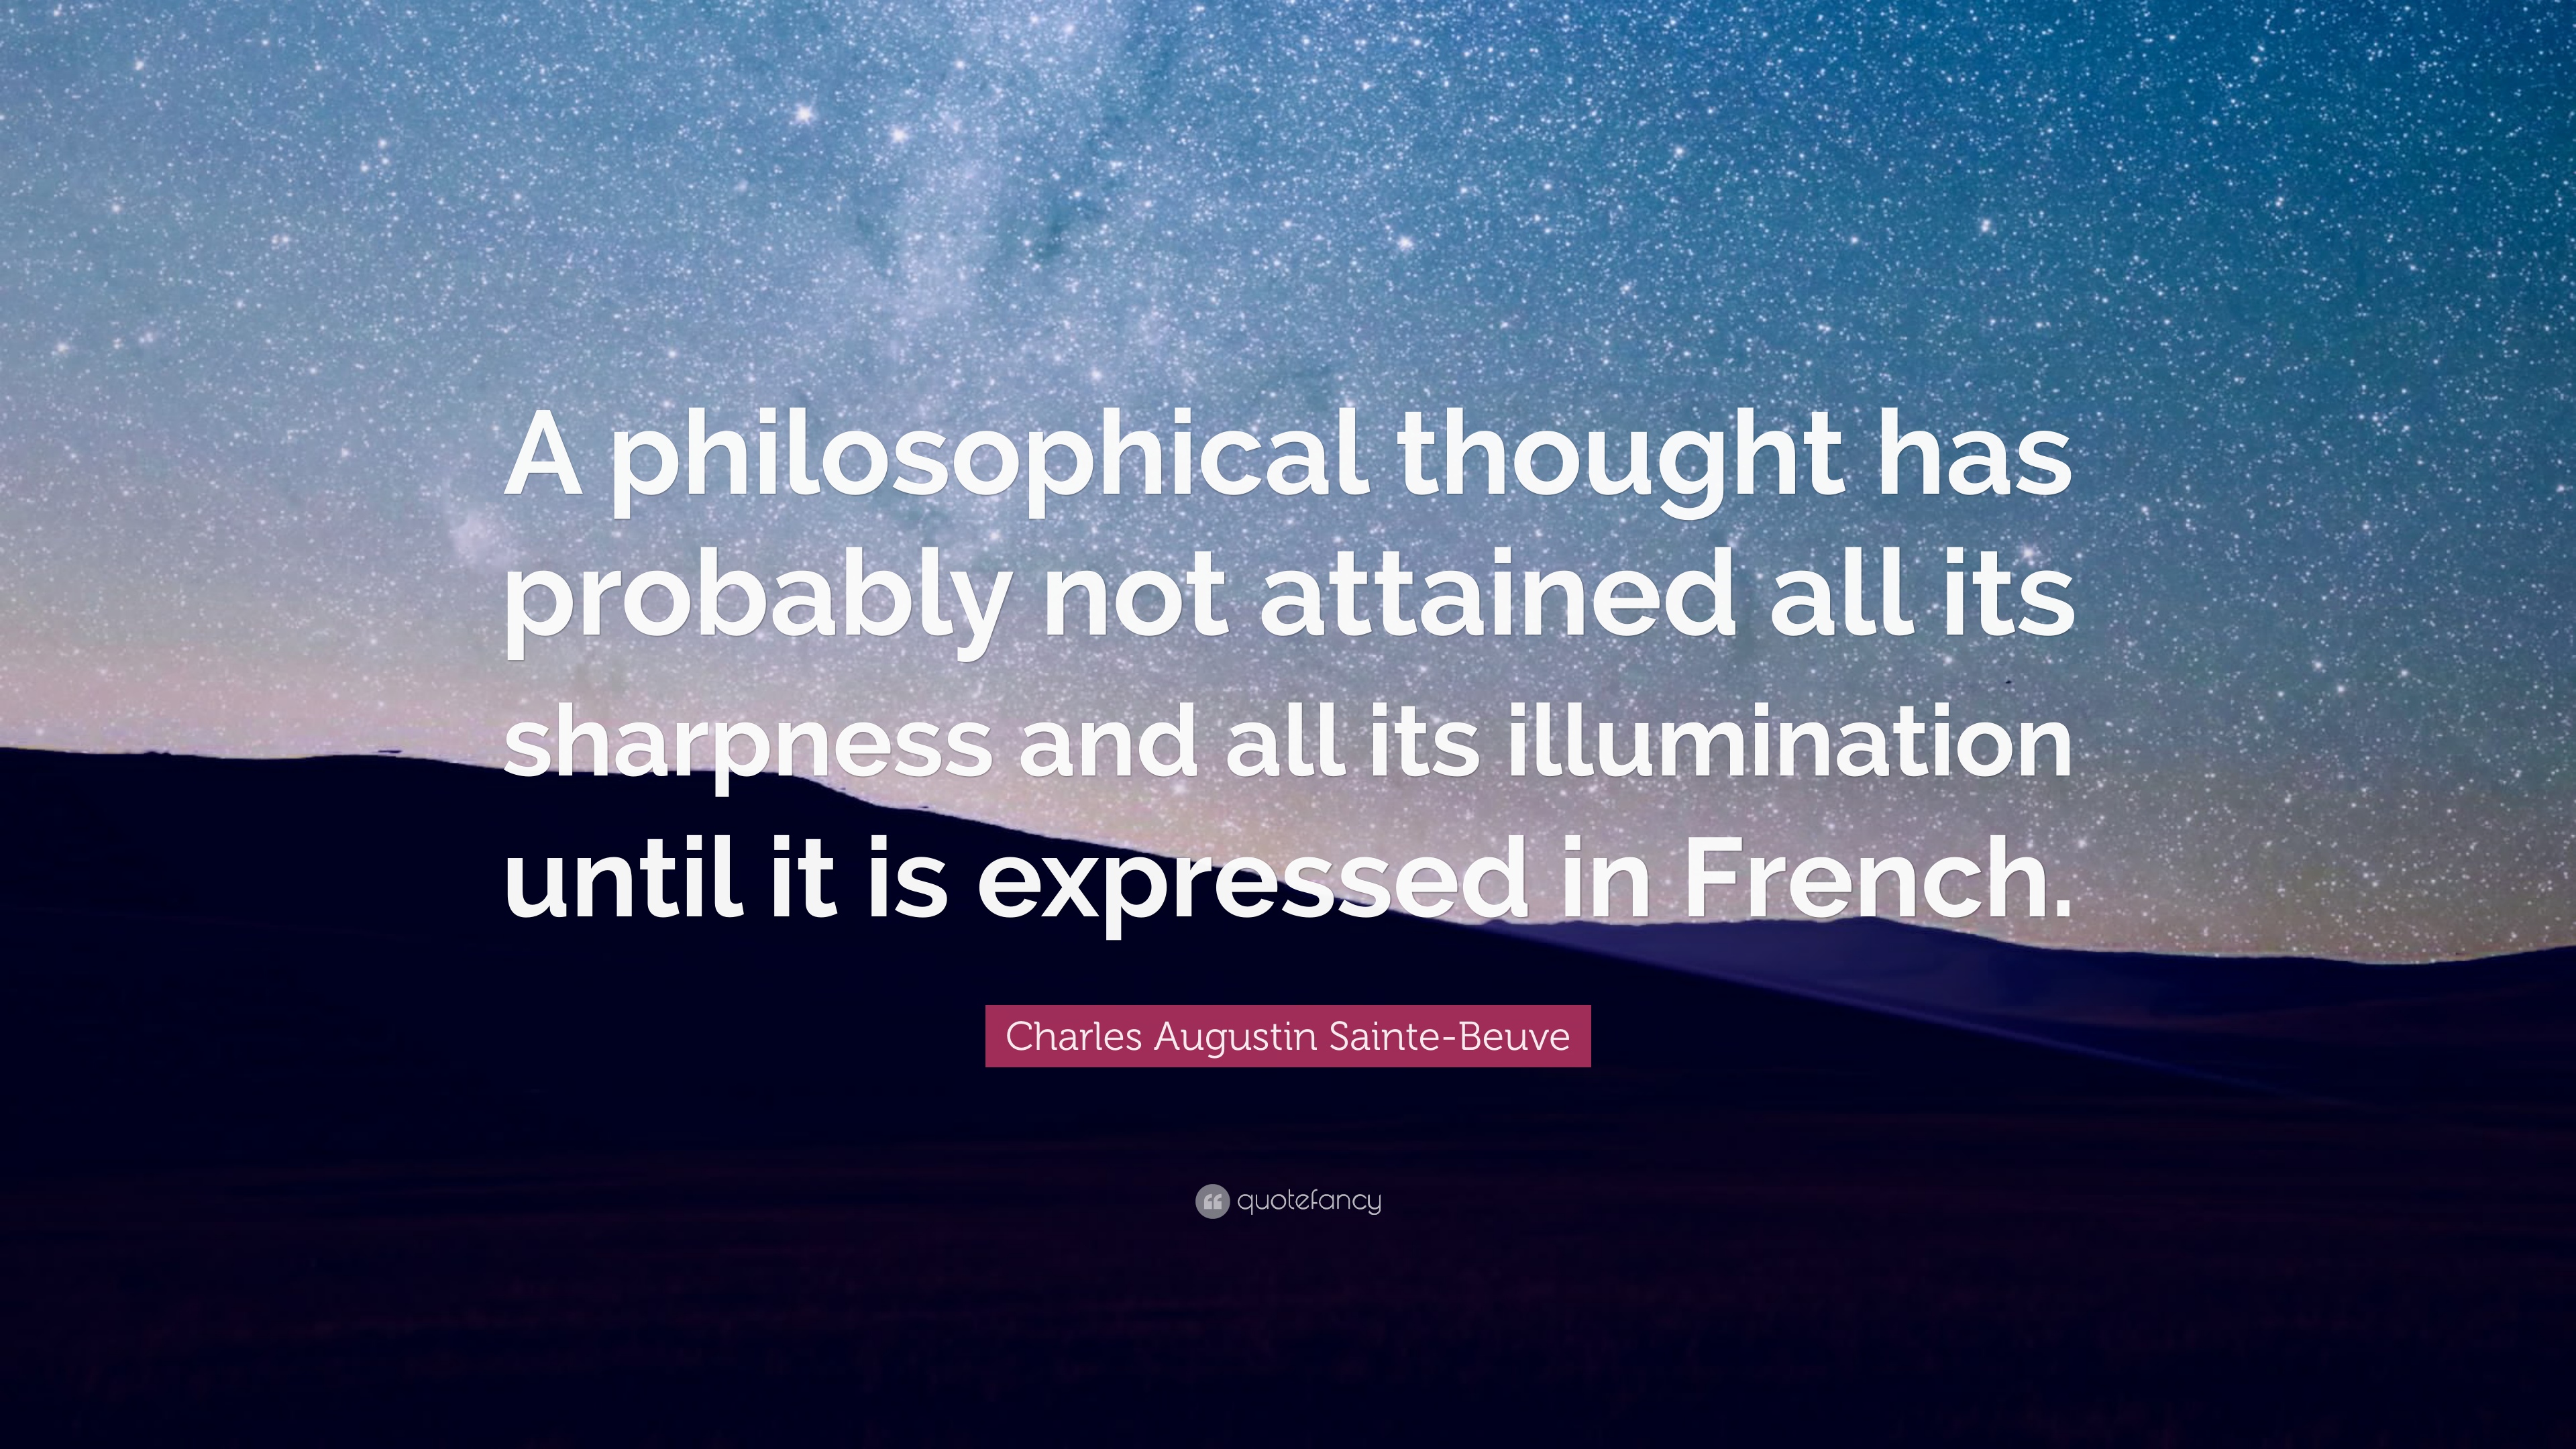 Charles Augustin Sainte Beuve Quote: “A Philosophical